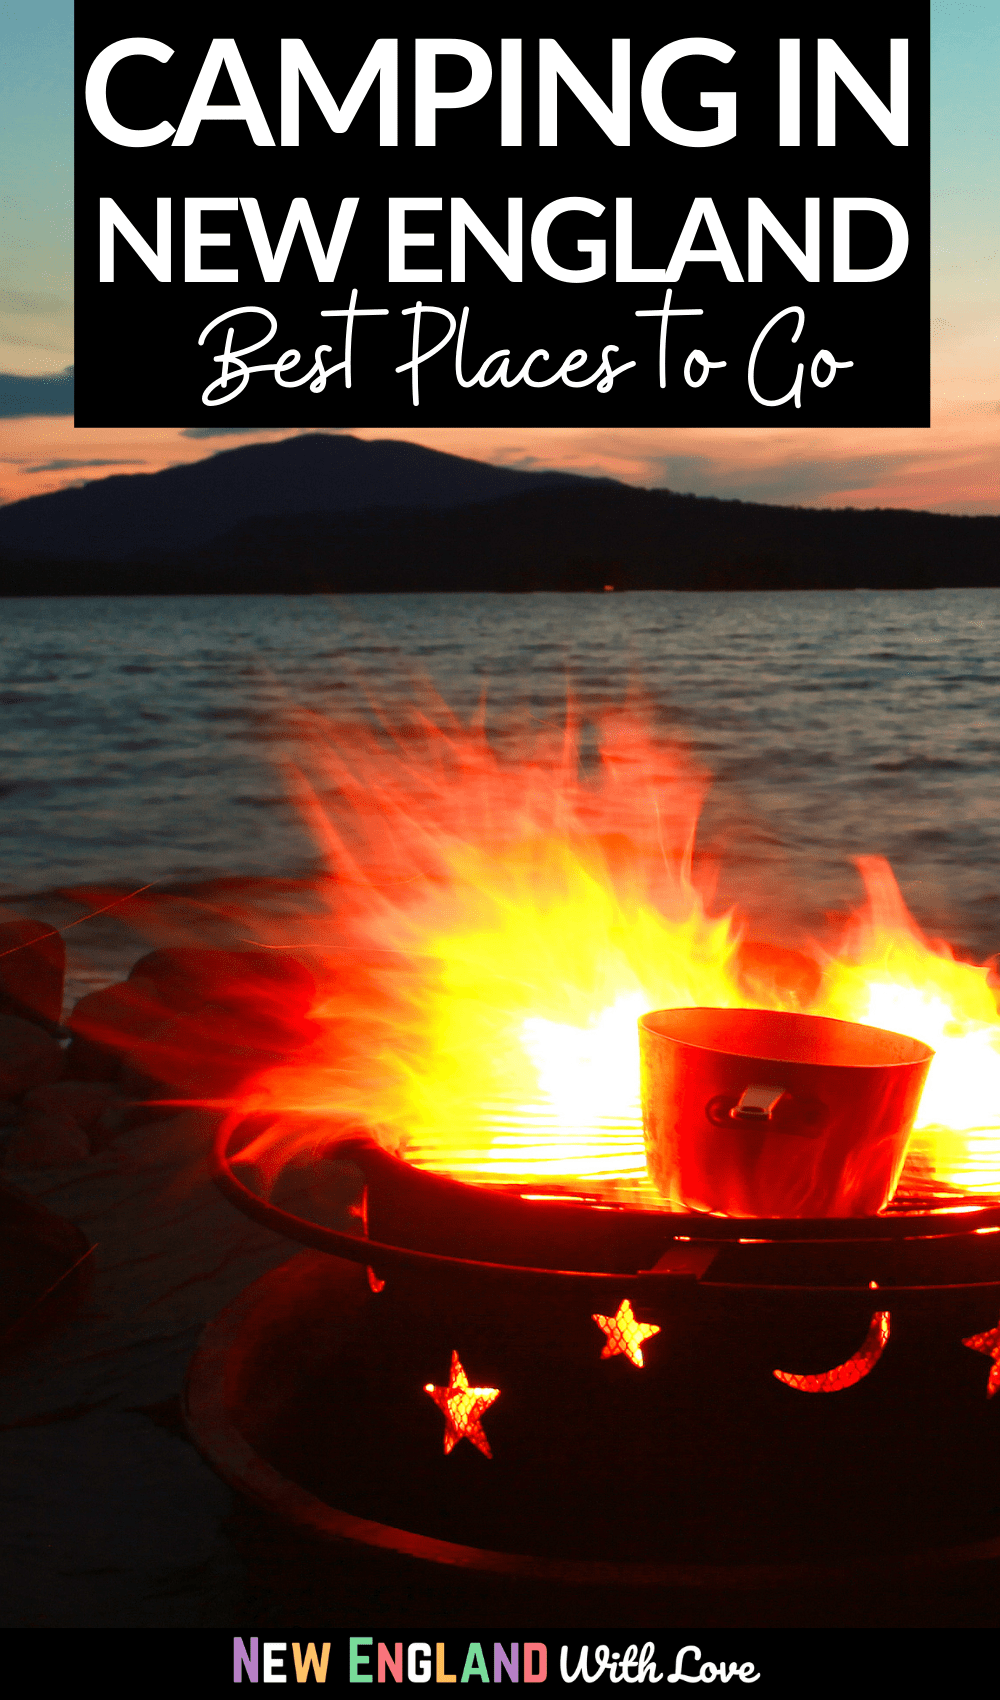 Pinterest graphic reading "Camping in New England Best Places to Go"